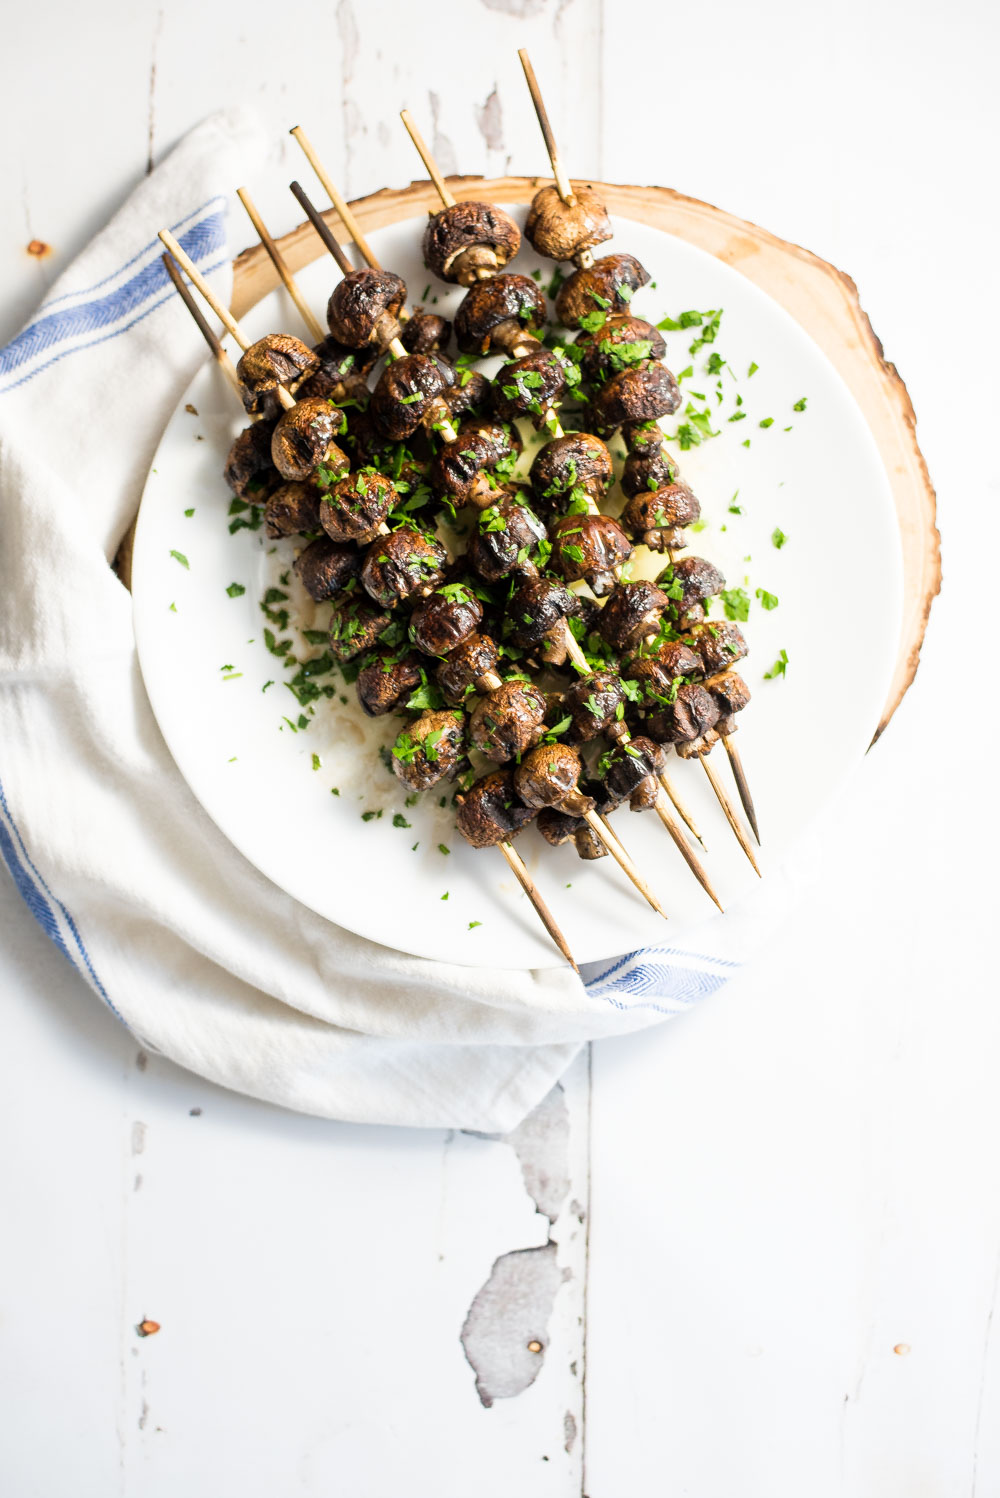 These grilled mushrooms with herbed brown butter sauce are the perfect side dish for that barbecue chicken and macaroni and cheese!